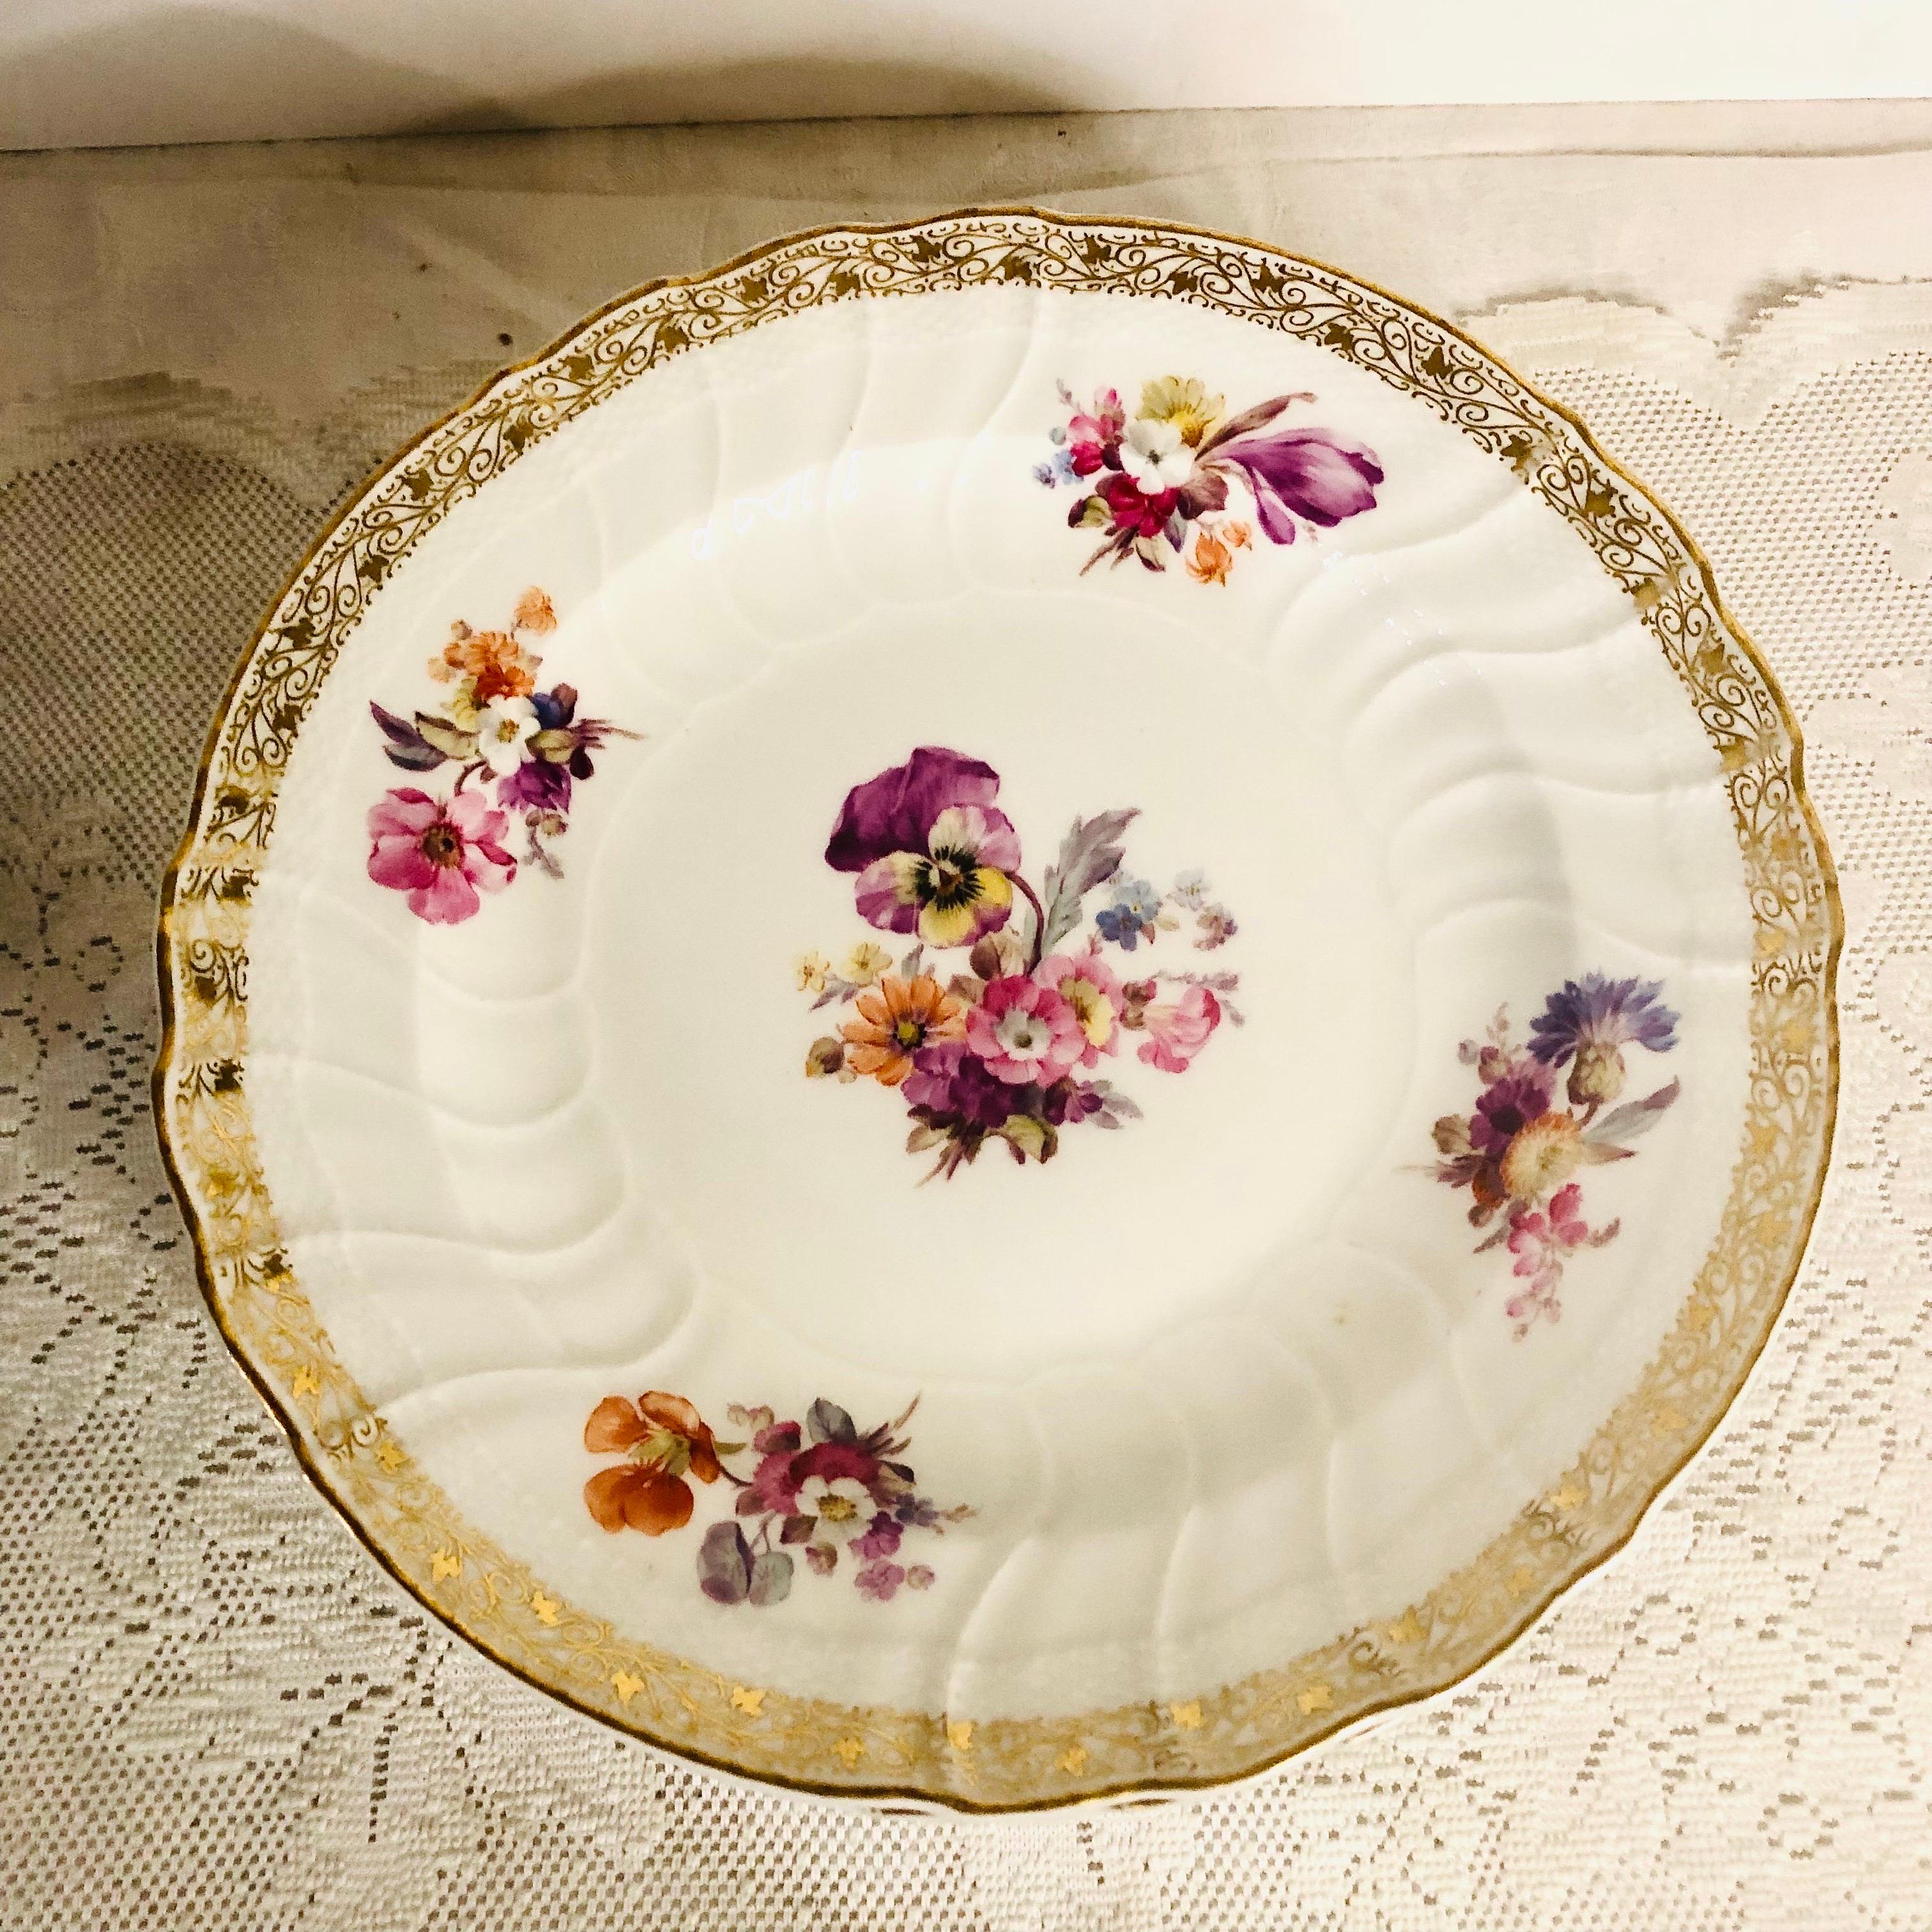 12 KPM Dinner Plates, Each Hand-Painted with a Different Central Flower Bouquet For Sale 2